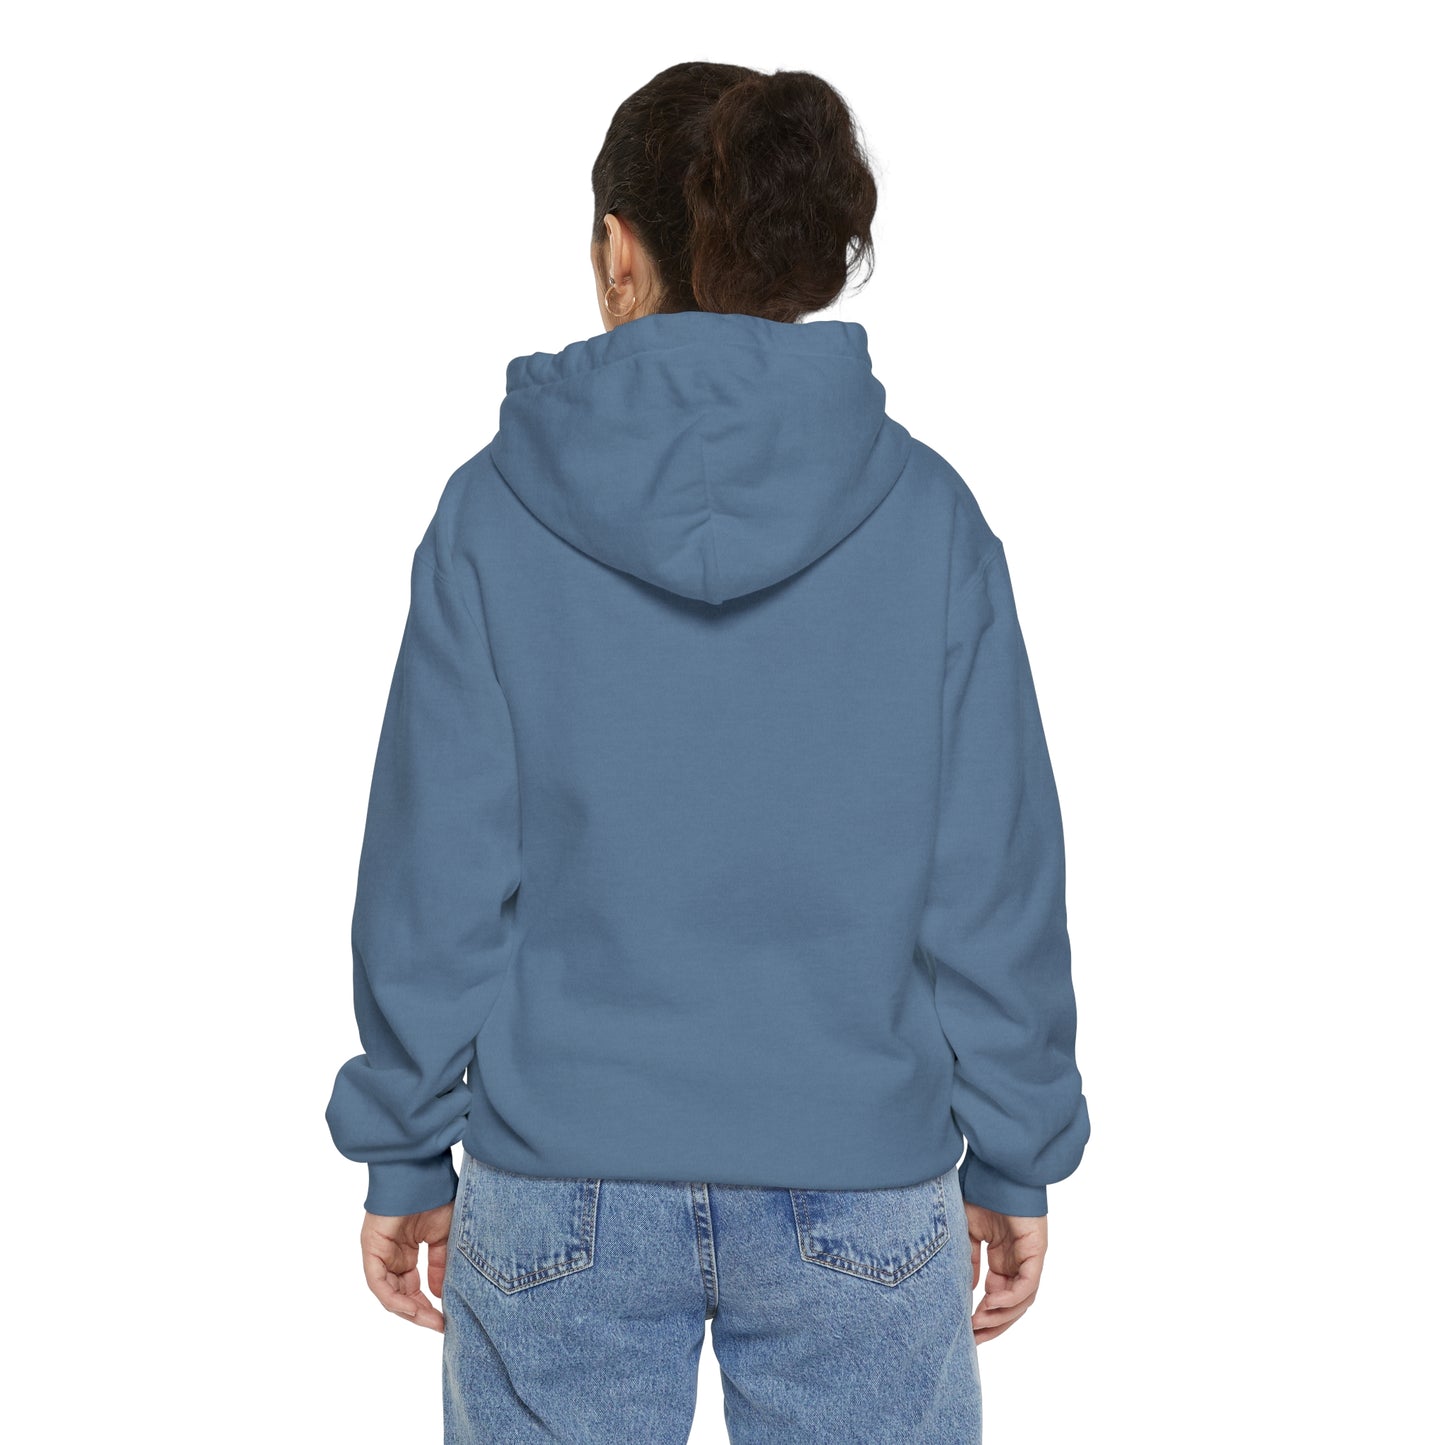 Nothing Changes, v2 Unisex Garment-Dyed Hoodie